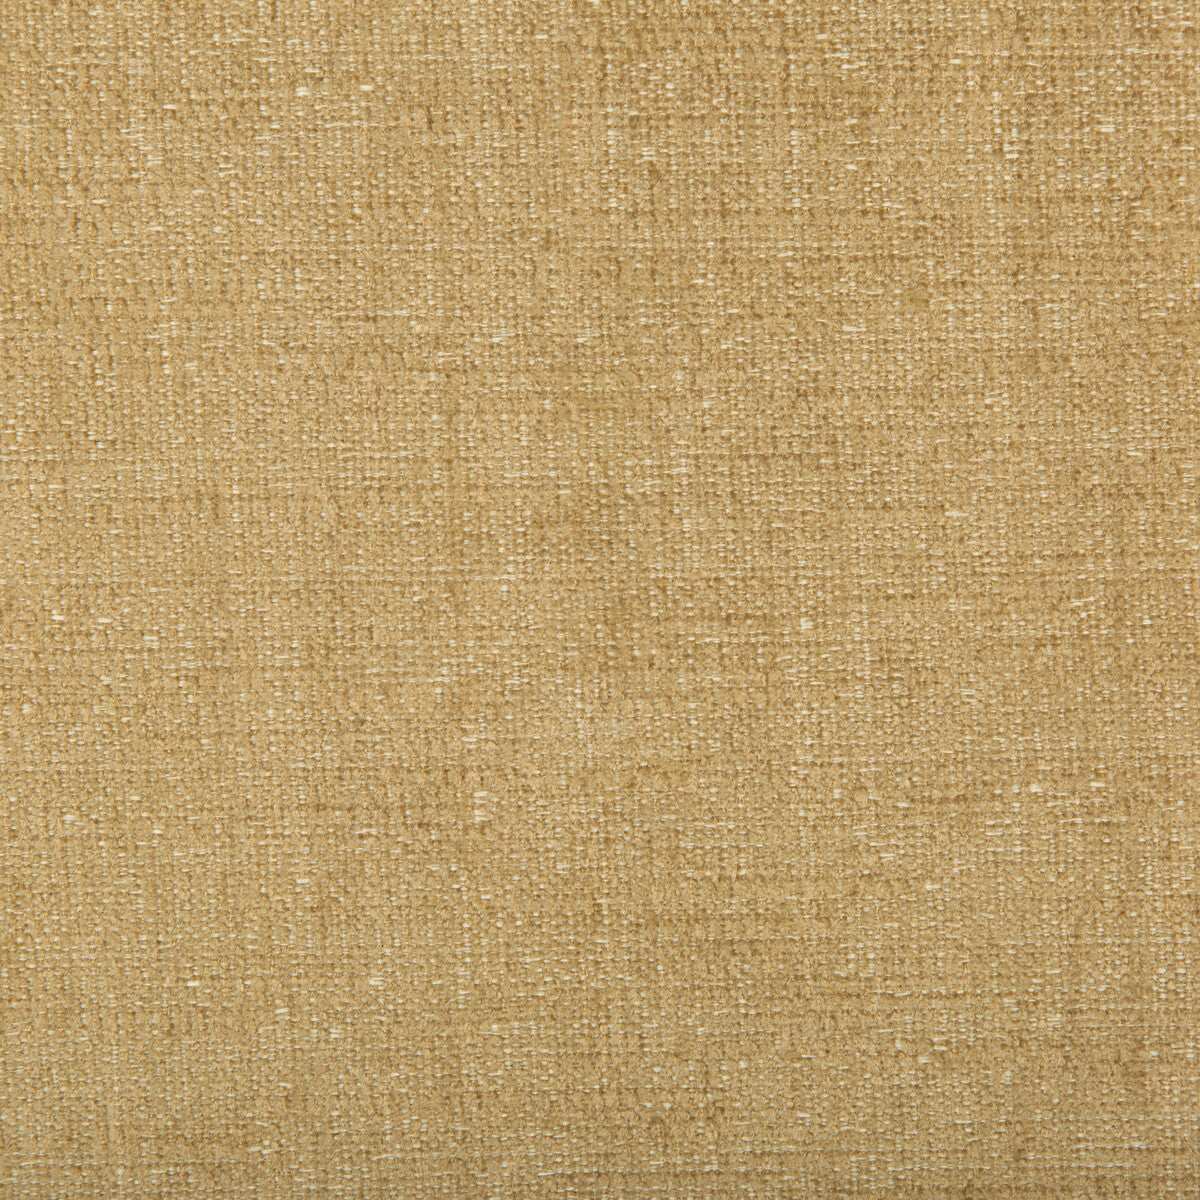 Kravet Contract fabric in 34636-1616 color - pattern 34636.1616.0 - by Kravet Contract in the Crypton Incase collection